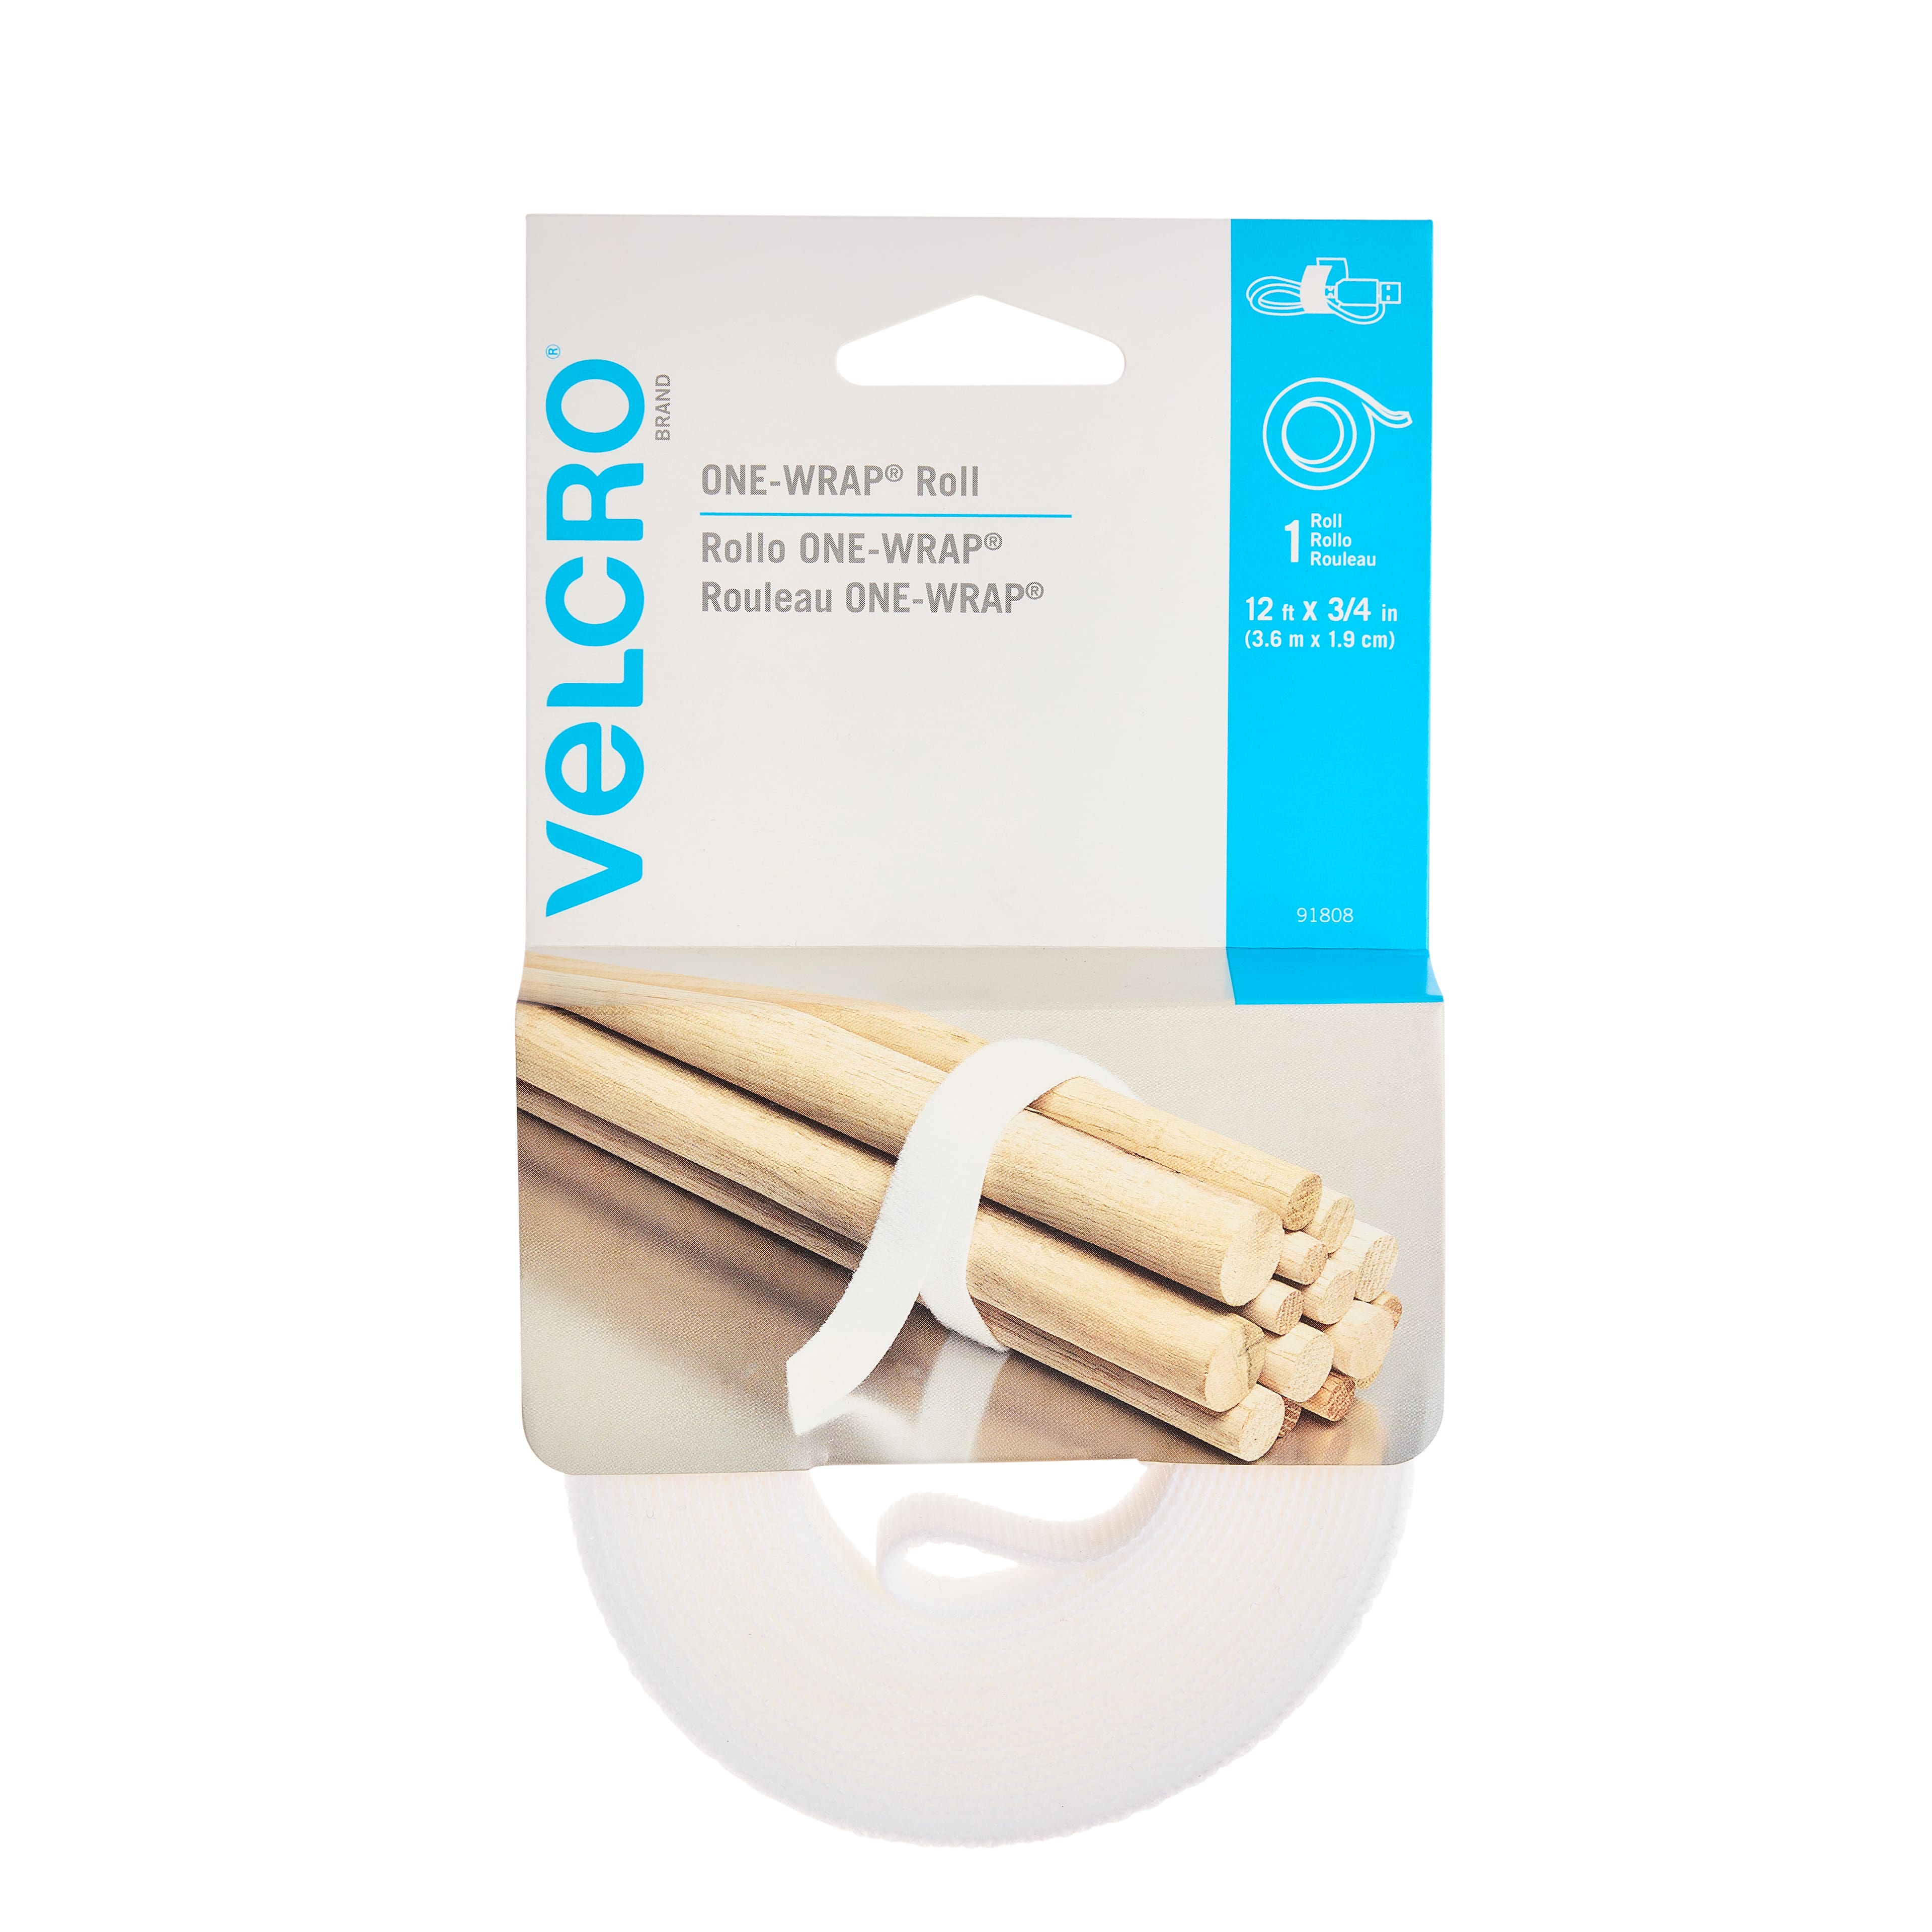 Velcro Brand One - Wrap Roll 12ft x 3/4in, White